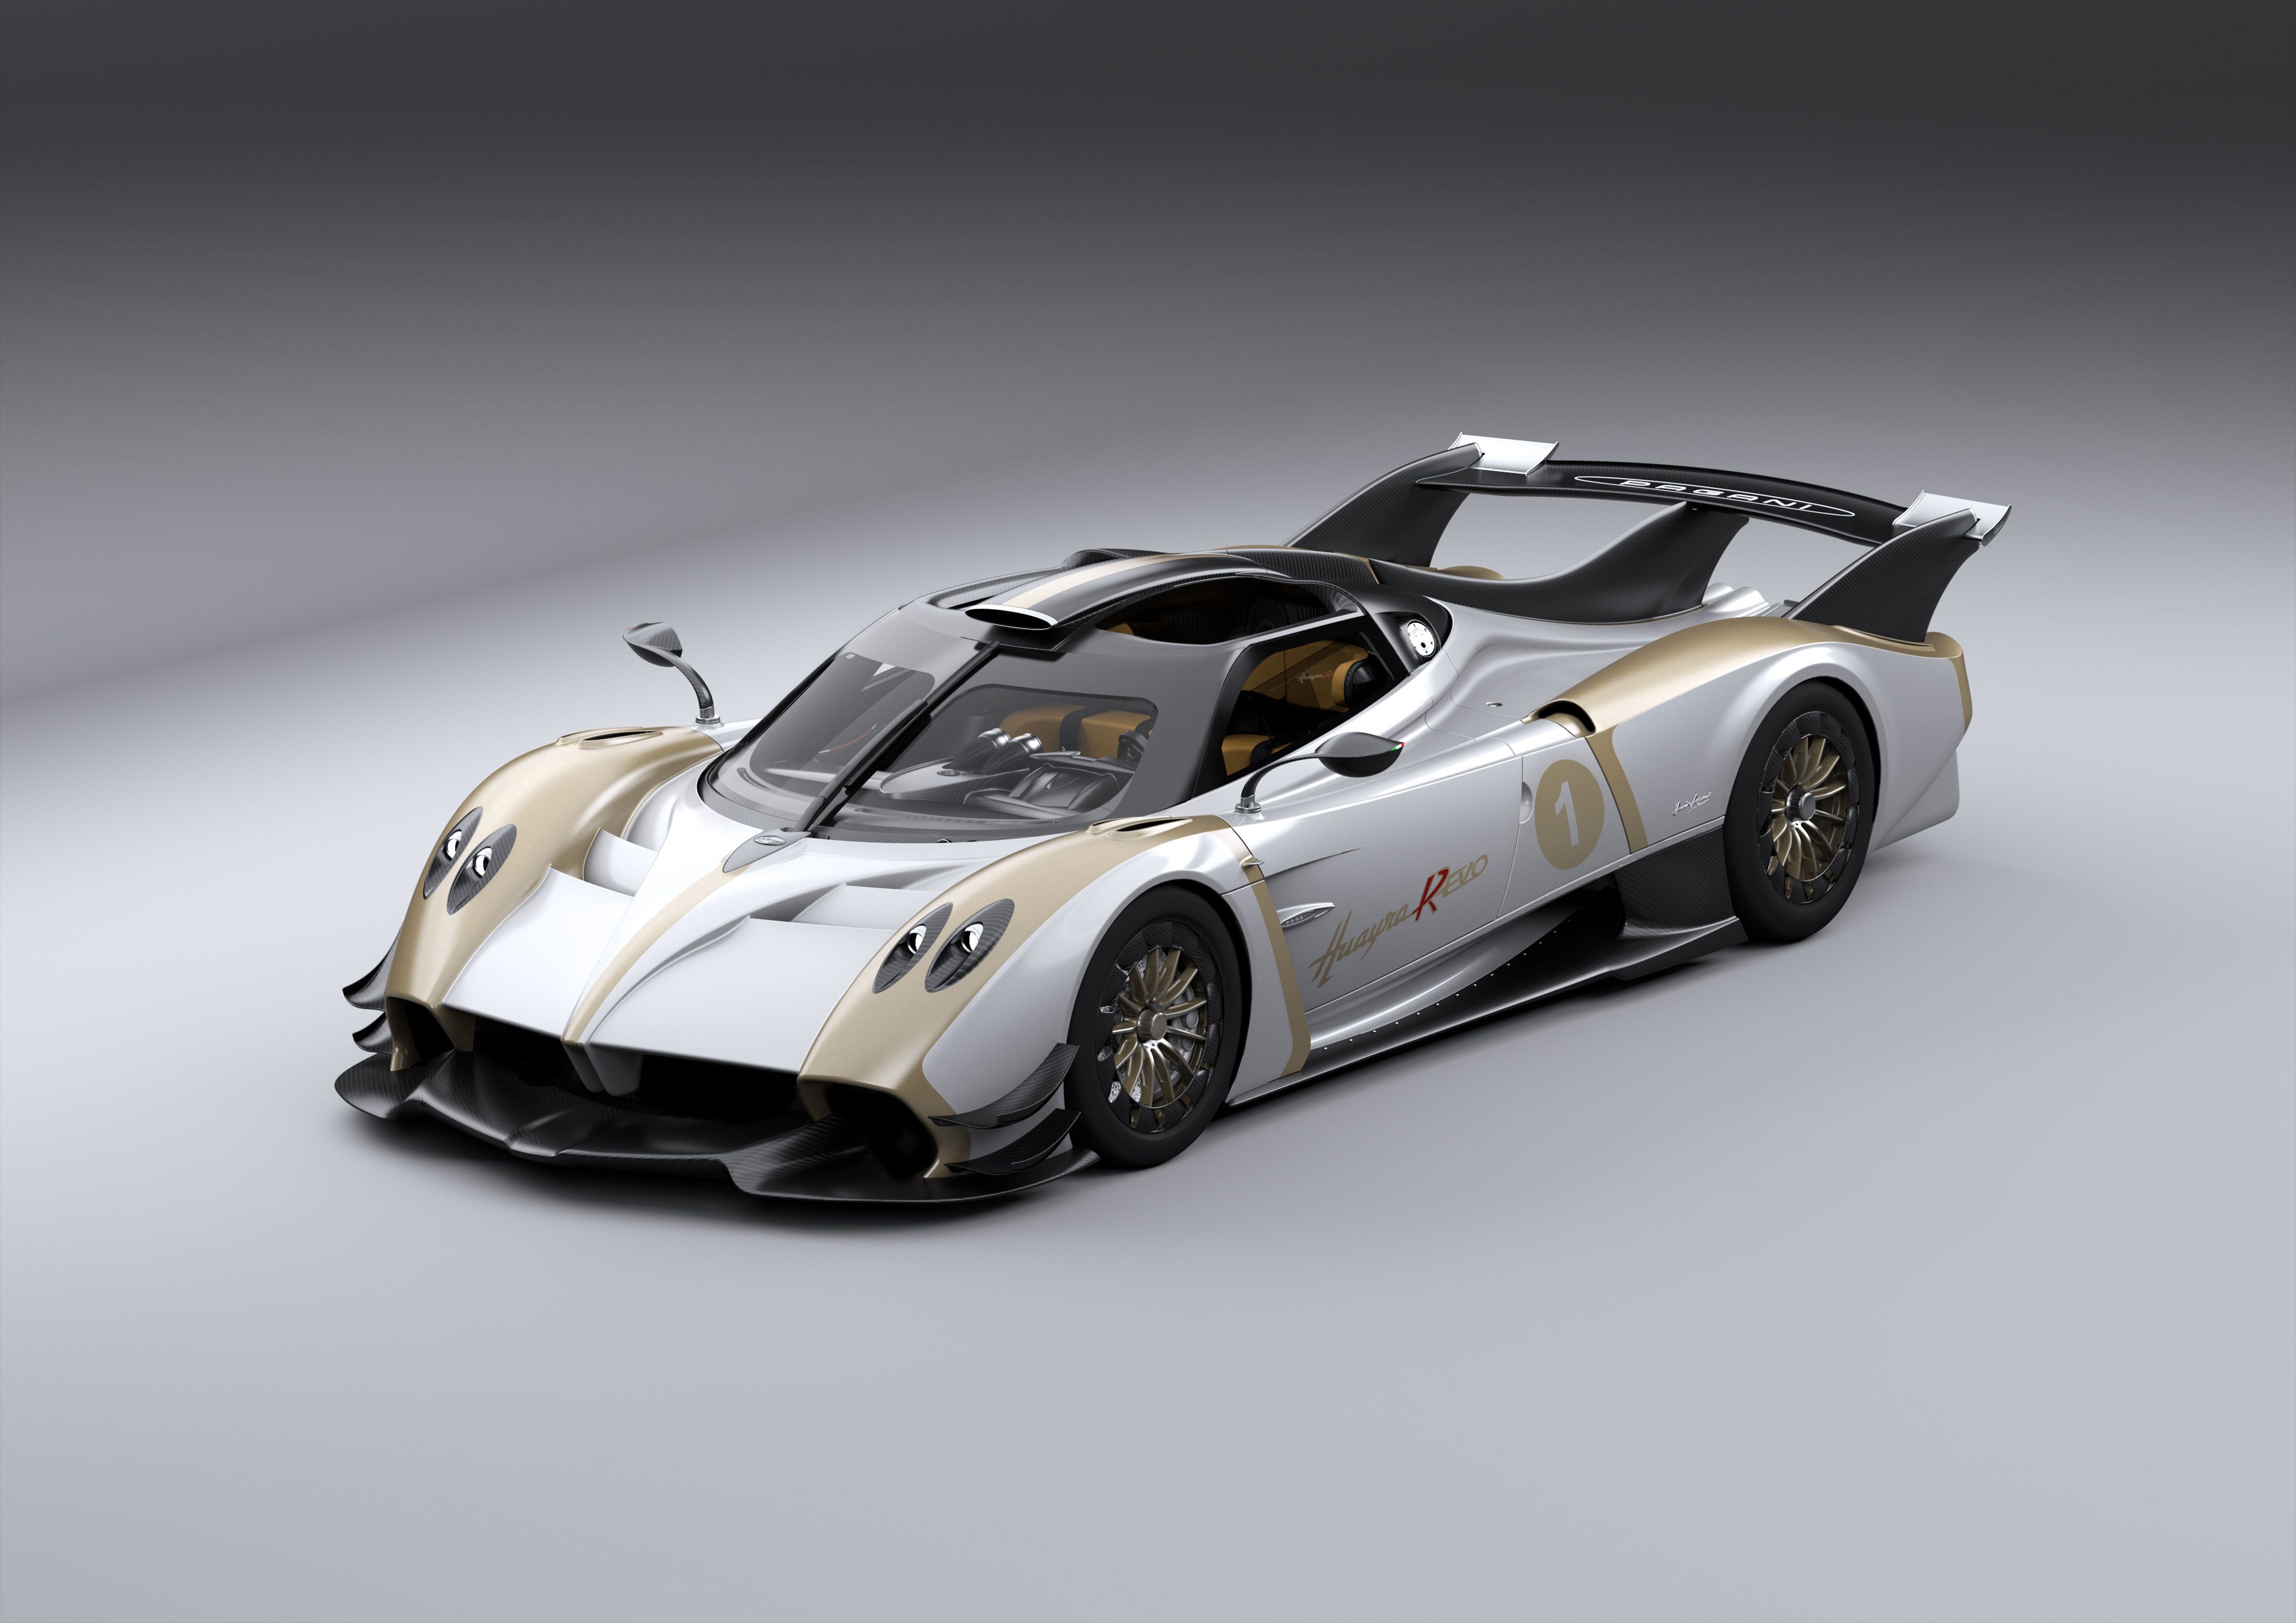 Pagani Huayra R Evo Is a Long-Tailed Track Monster With 900 HP